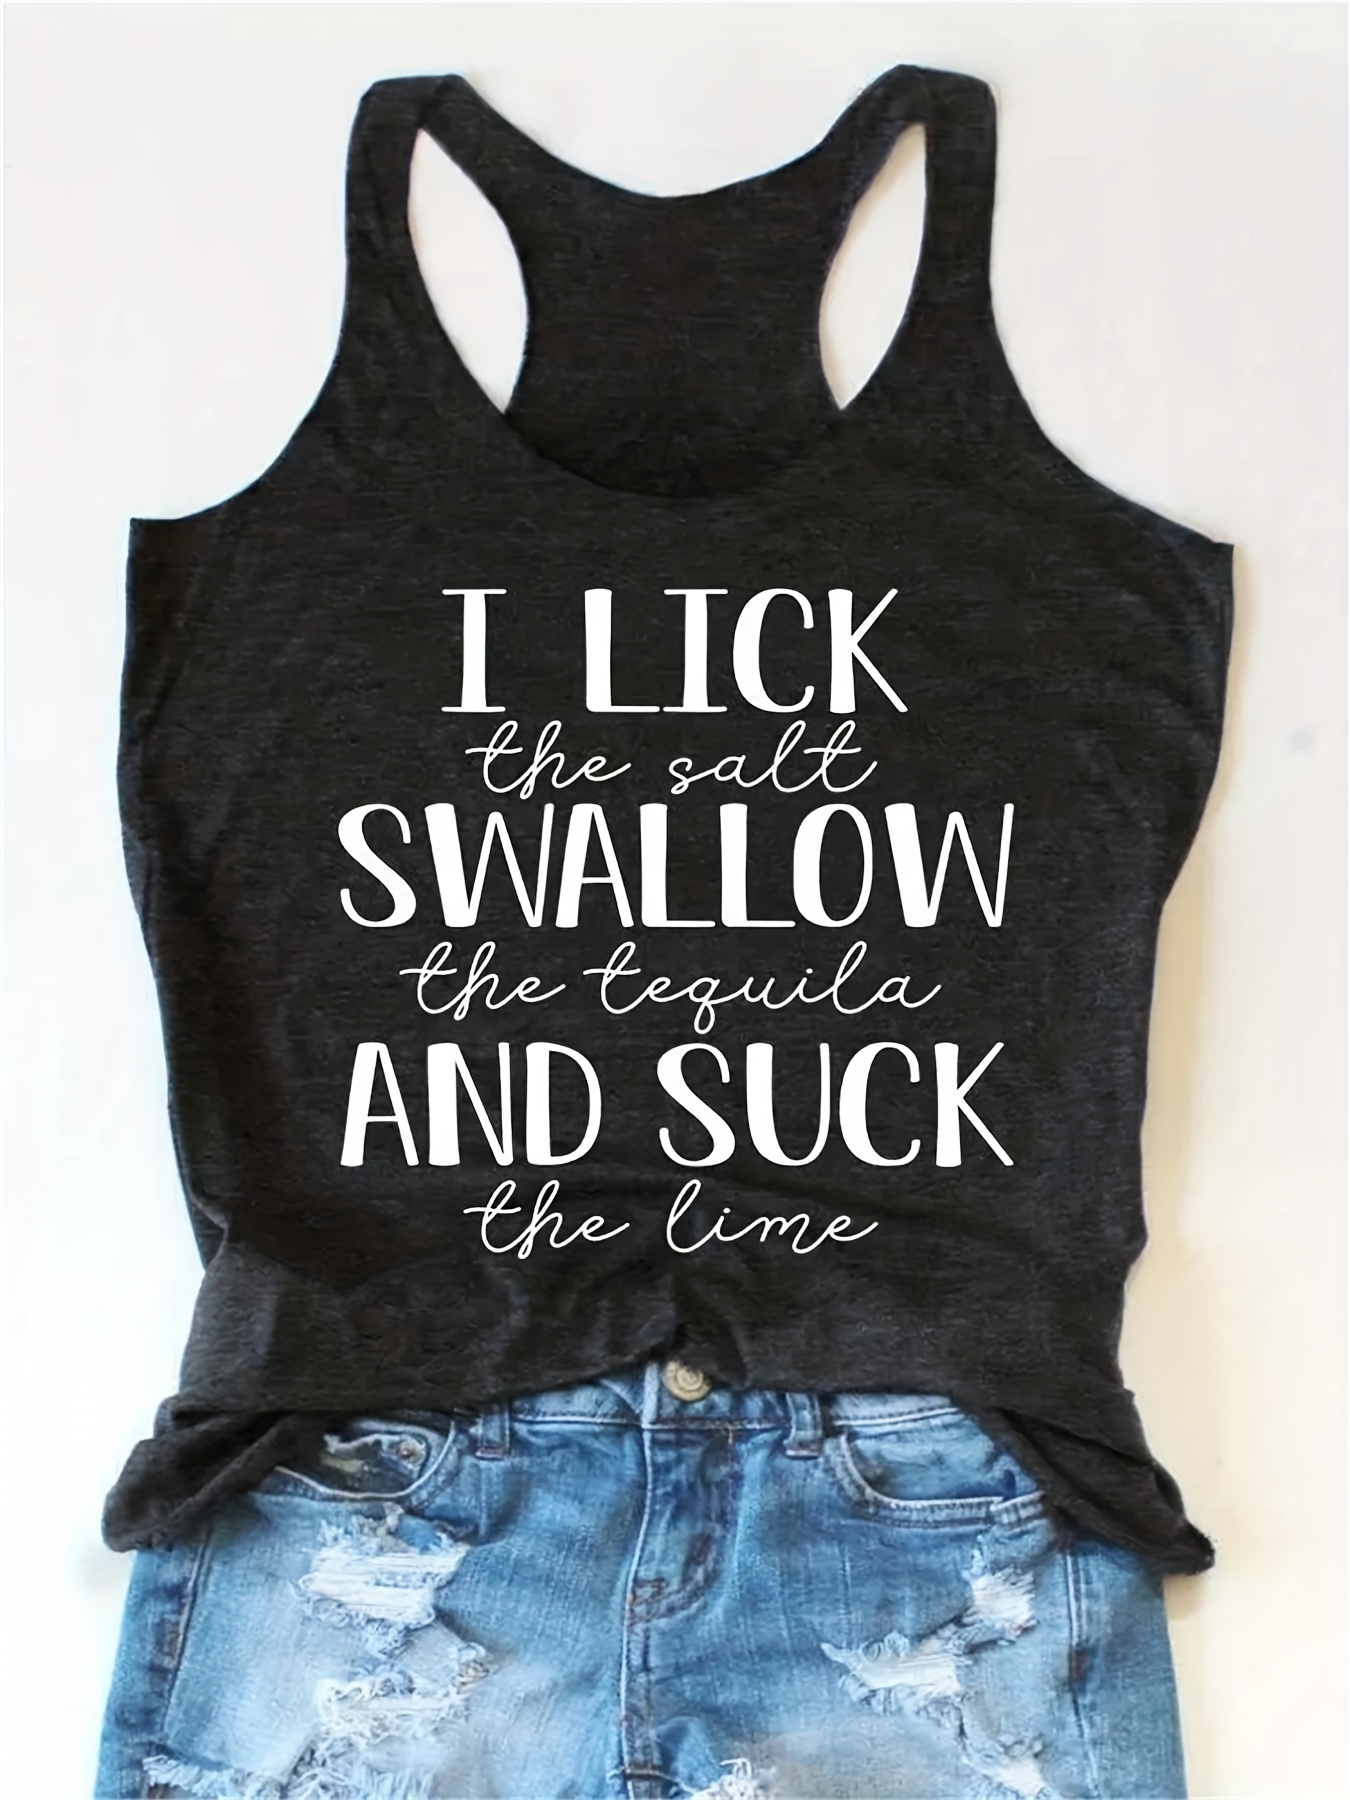 Women's Letter Print Tank Top Sale at Our Store